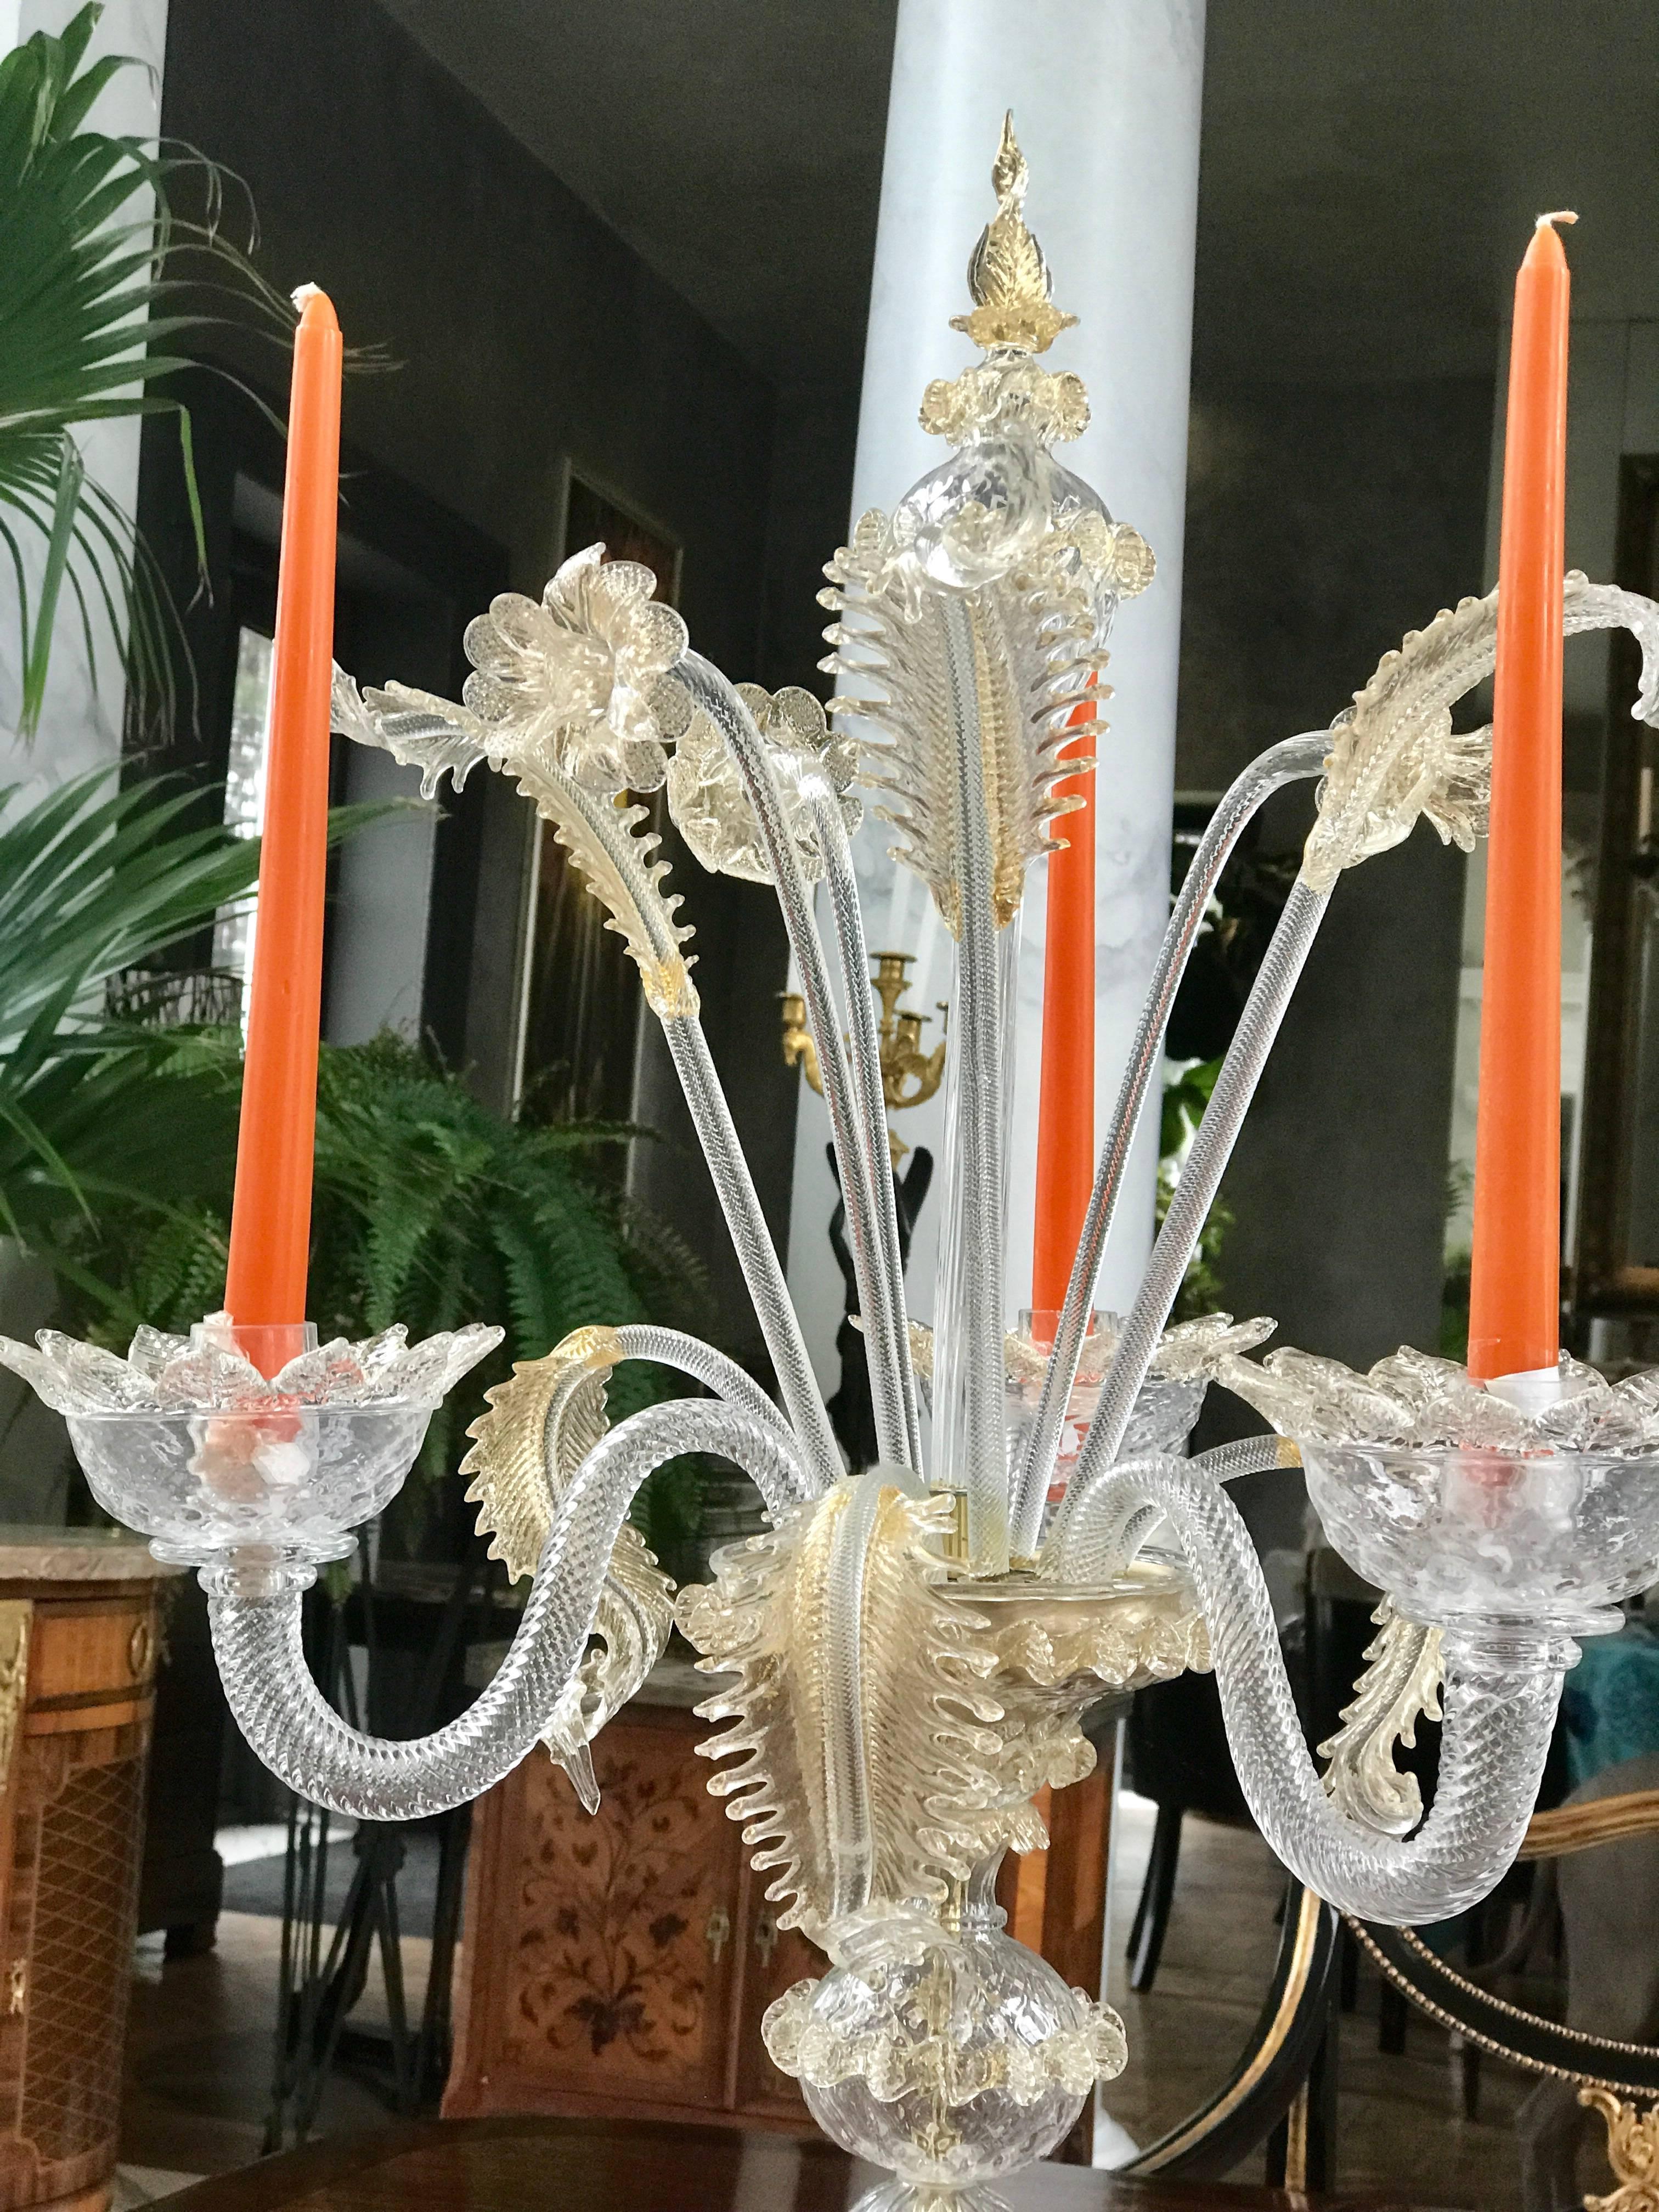 This whimsical Pair of Murano candelabra is handblown with 24-karat gold inclusions.
A show stopper on any dining room table or sideboard.
Signed by the Maker Fornasier Luigi
